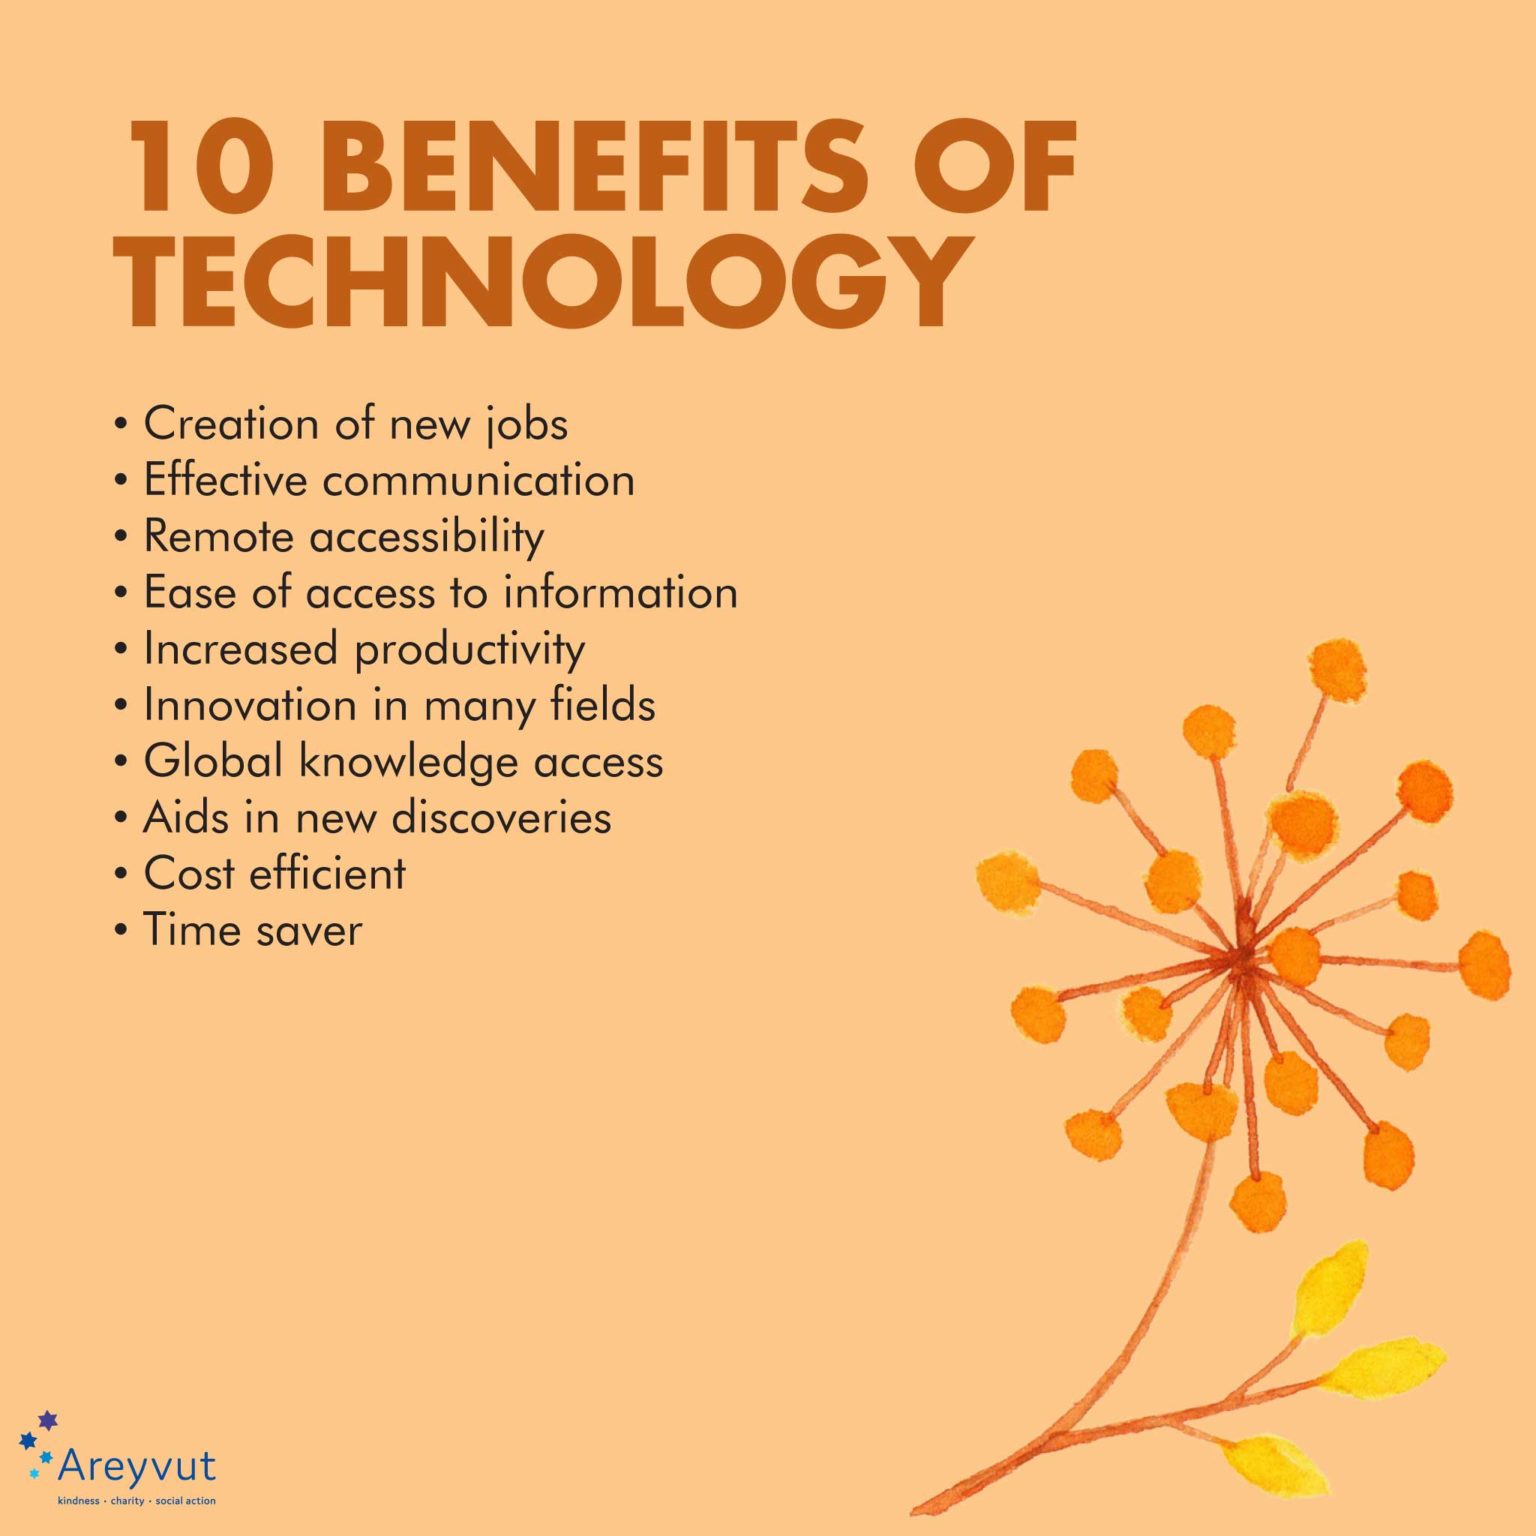 essay about benefits of technology in life